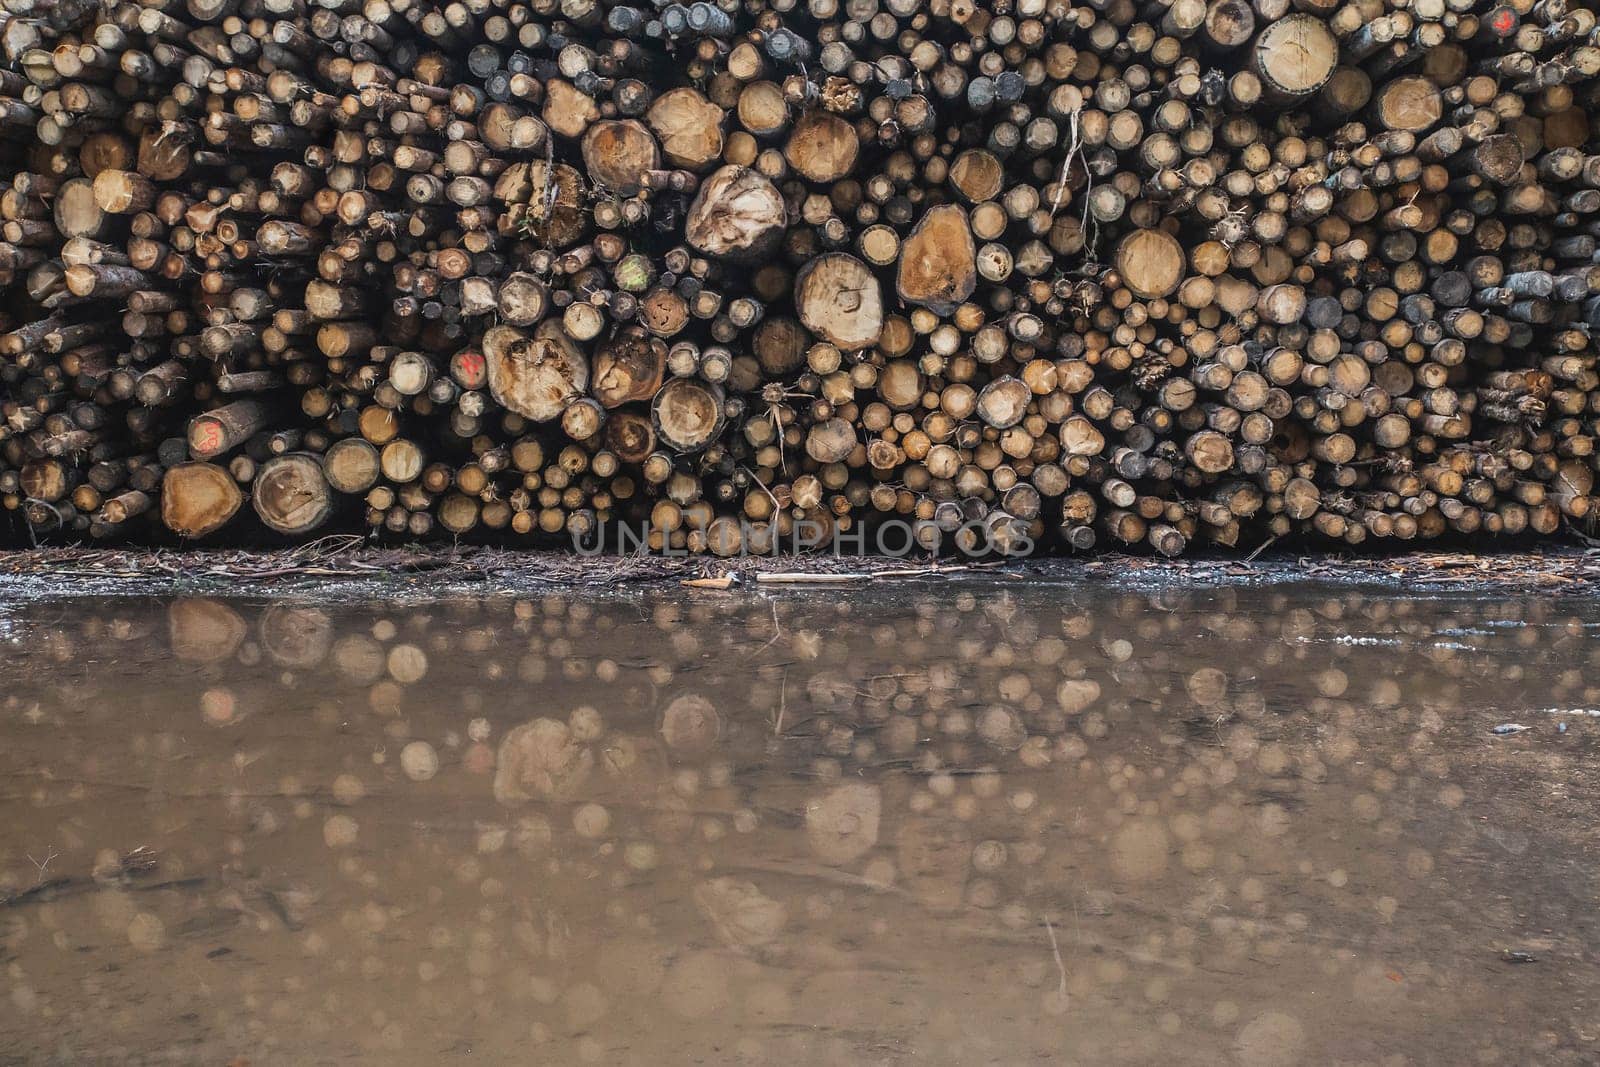 huge pile of cut trees is reflected in a large puddle.